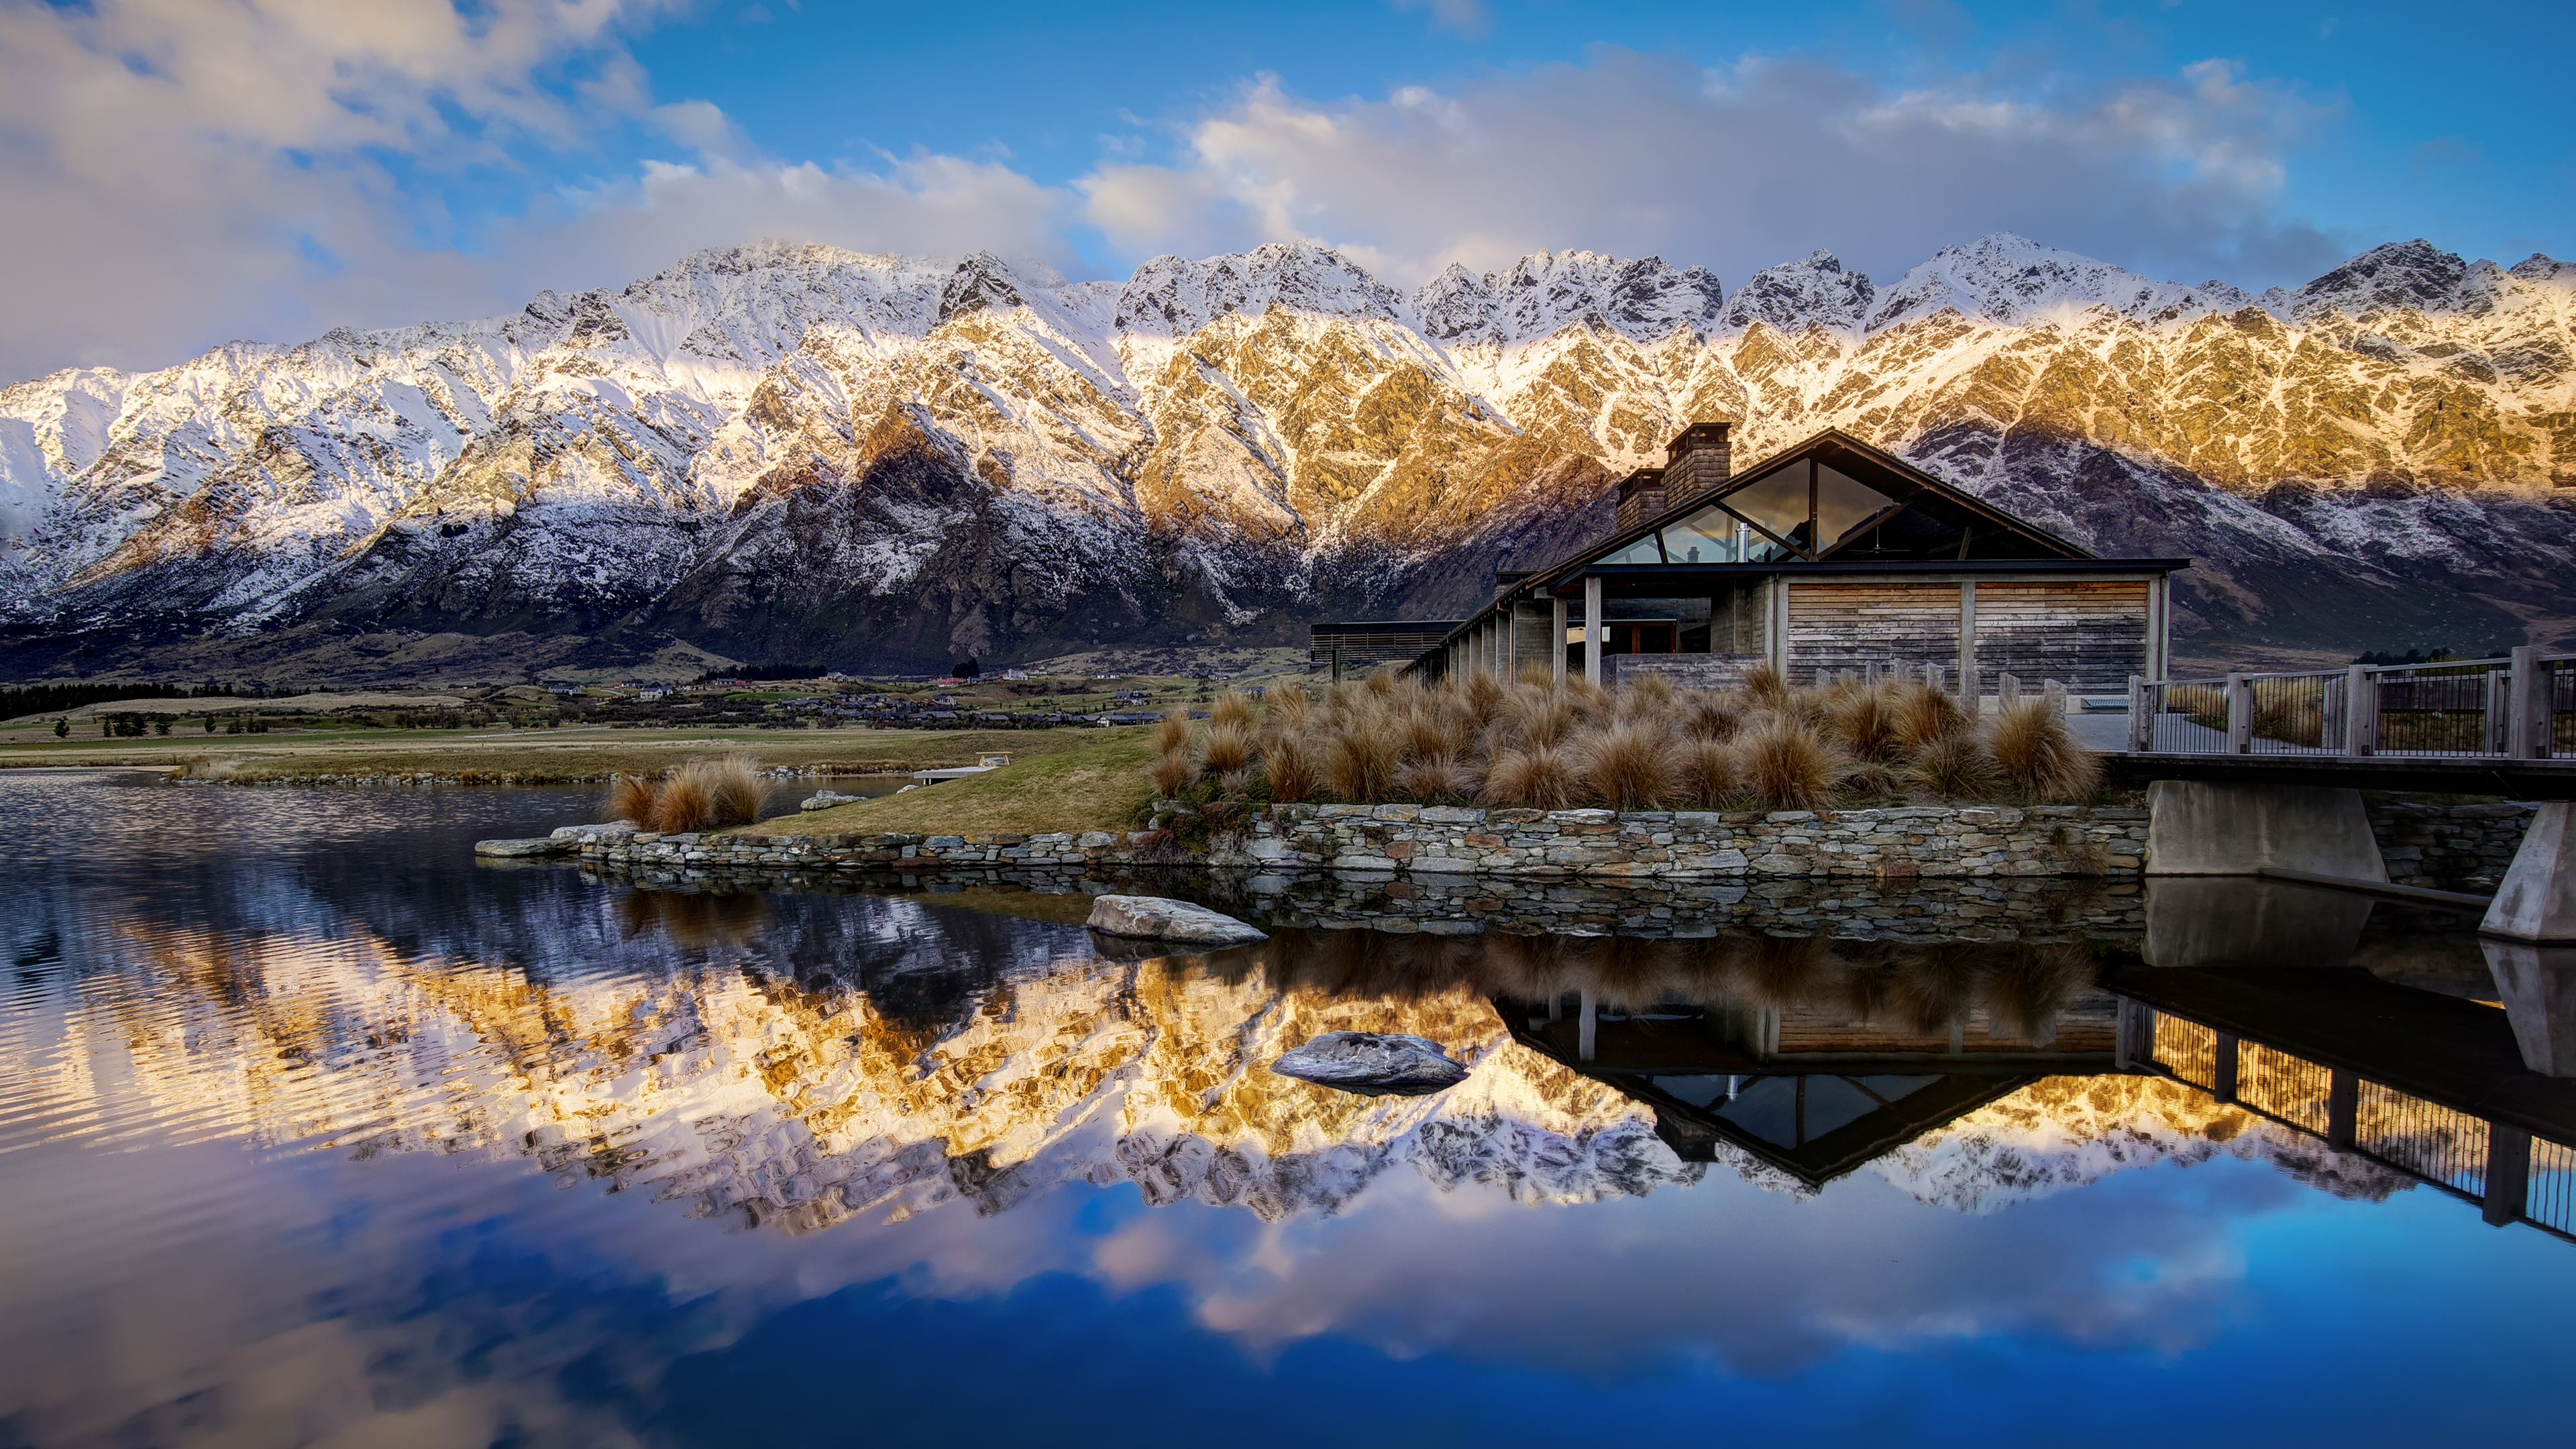 Landscape 4K Queenstown New Zealand Nature Mountains Water Reflection House Snow 3840x2160